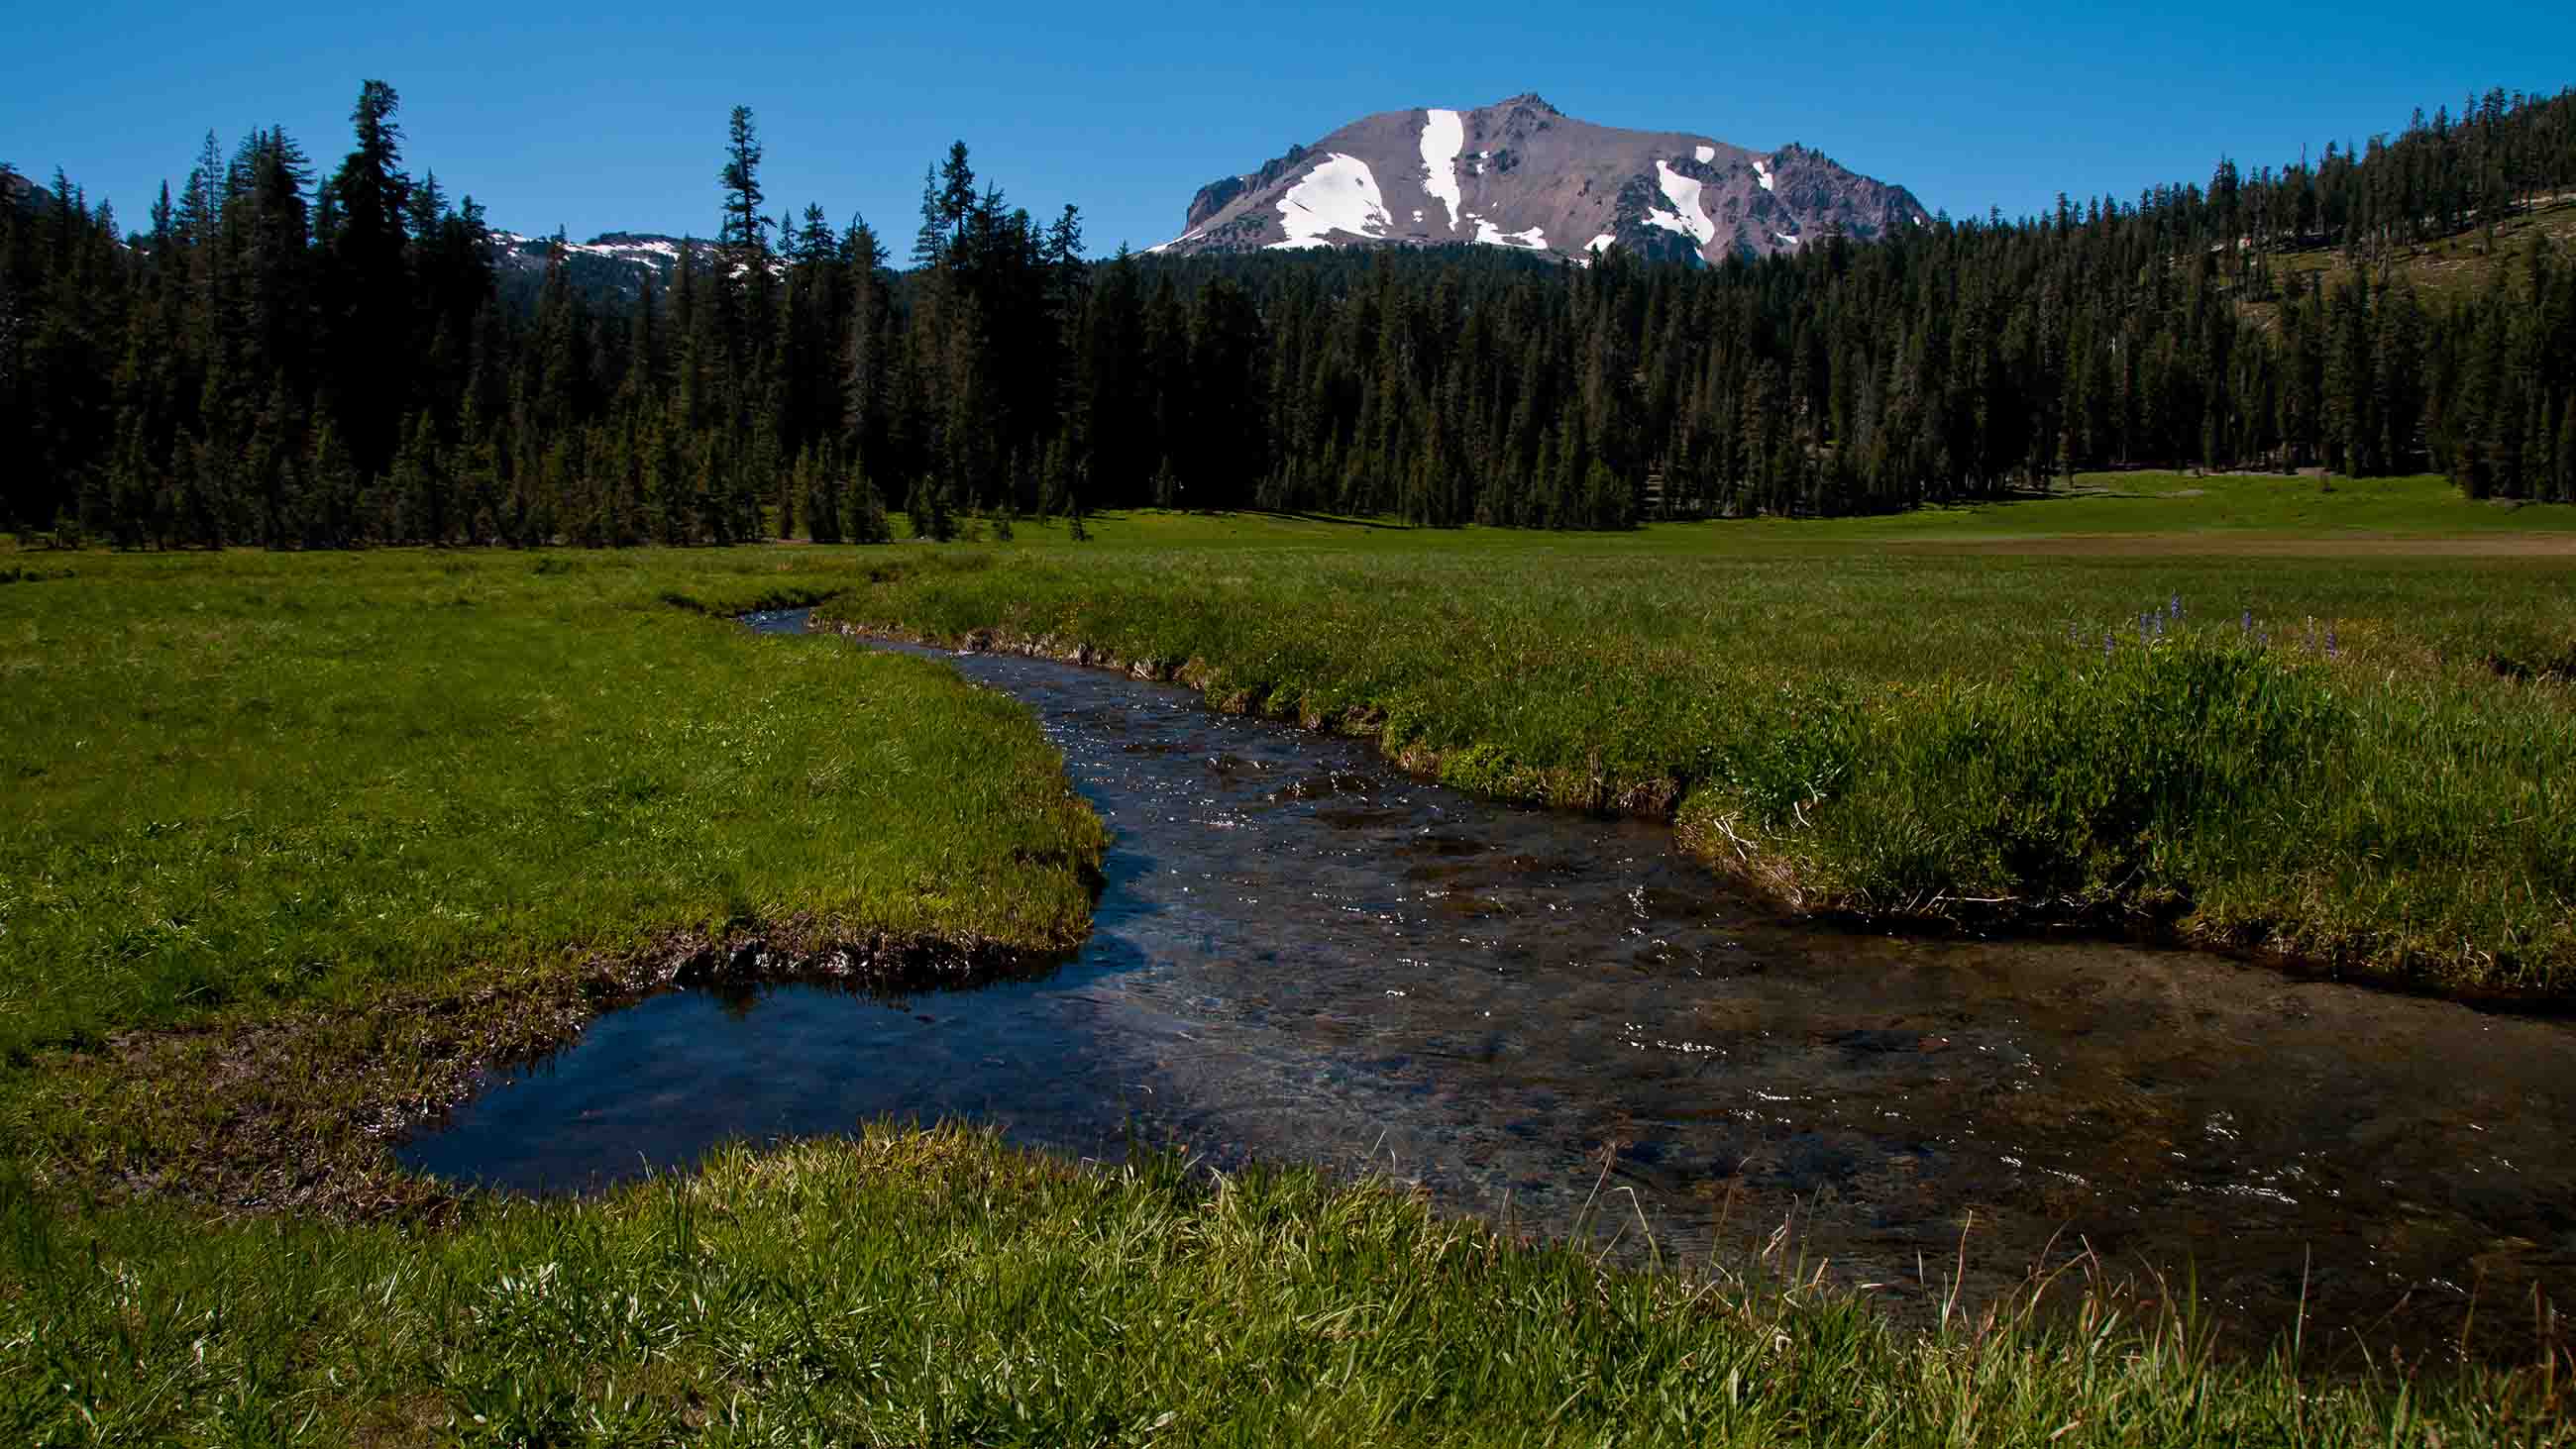 An EPA proposal could remove protections for thousands of miles of waterways and wetlands.